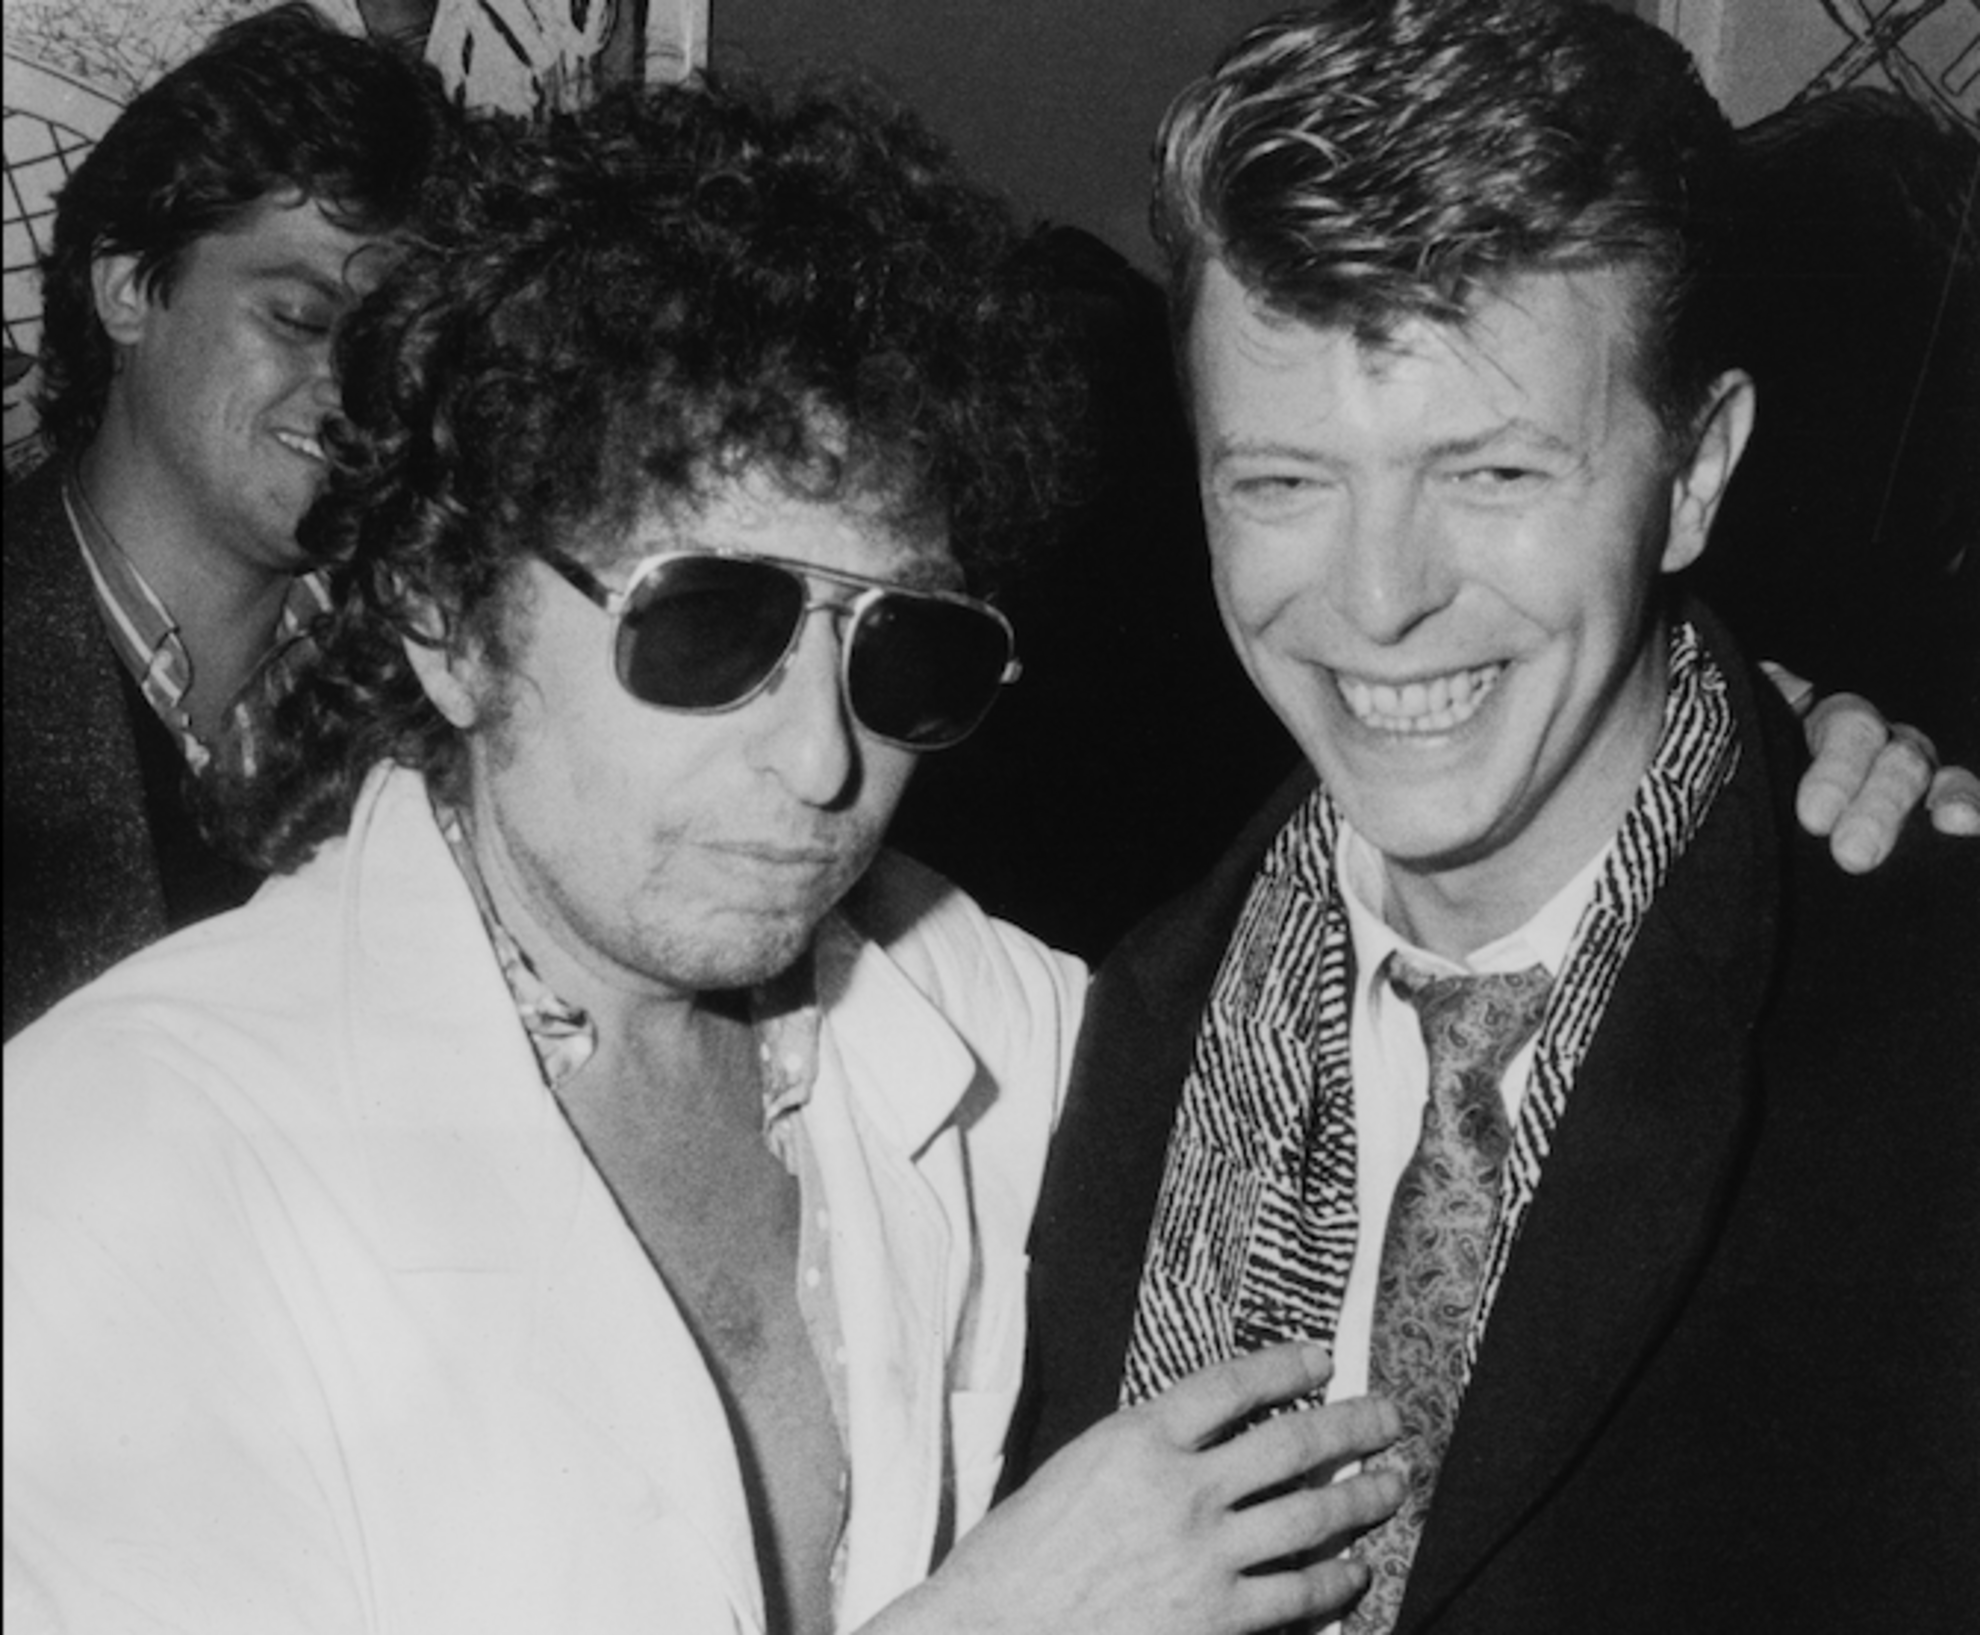 Bowie and friends - Bob Dylan